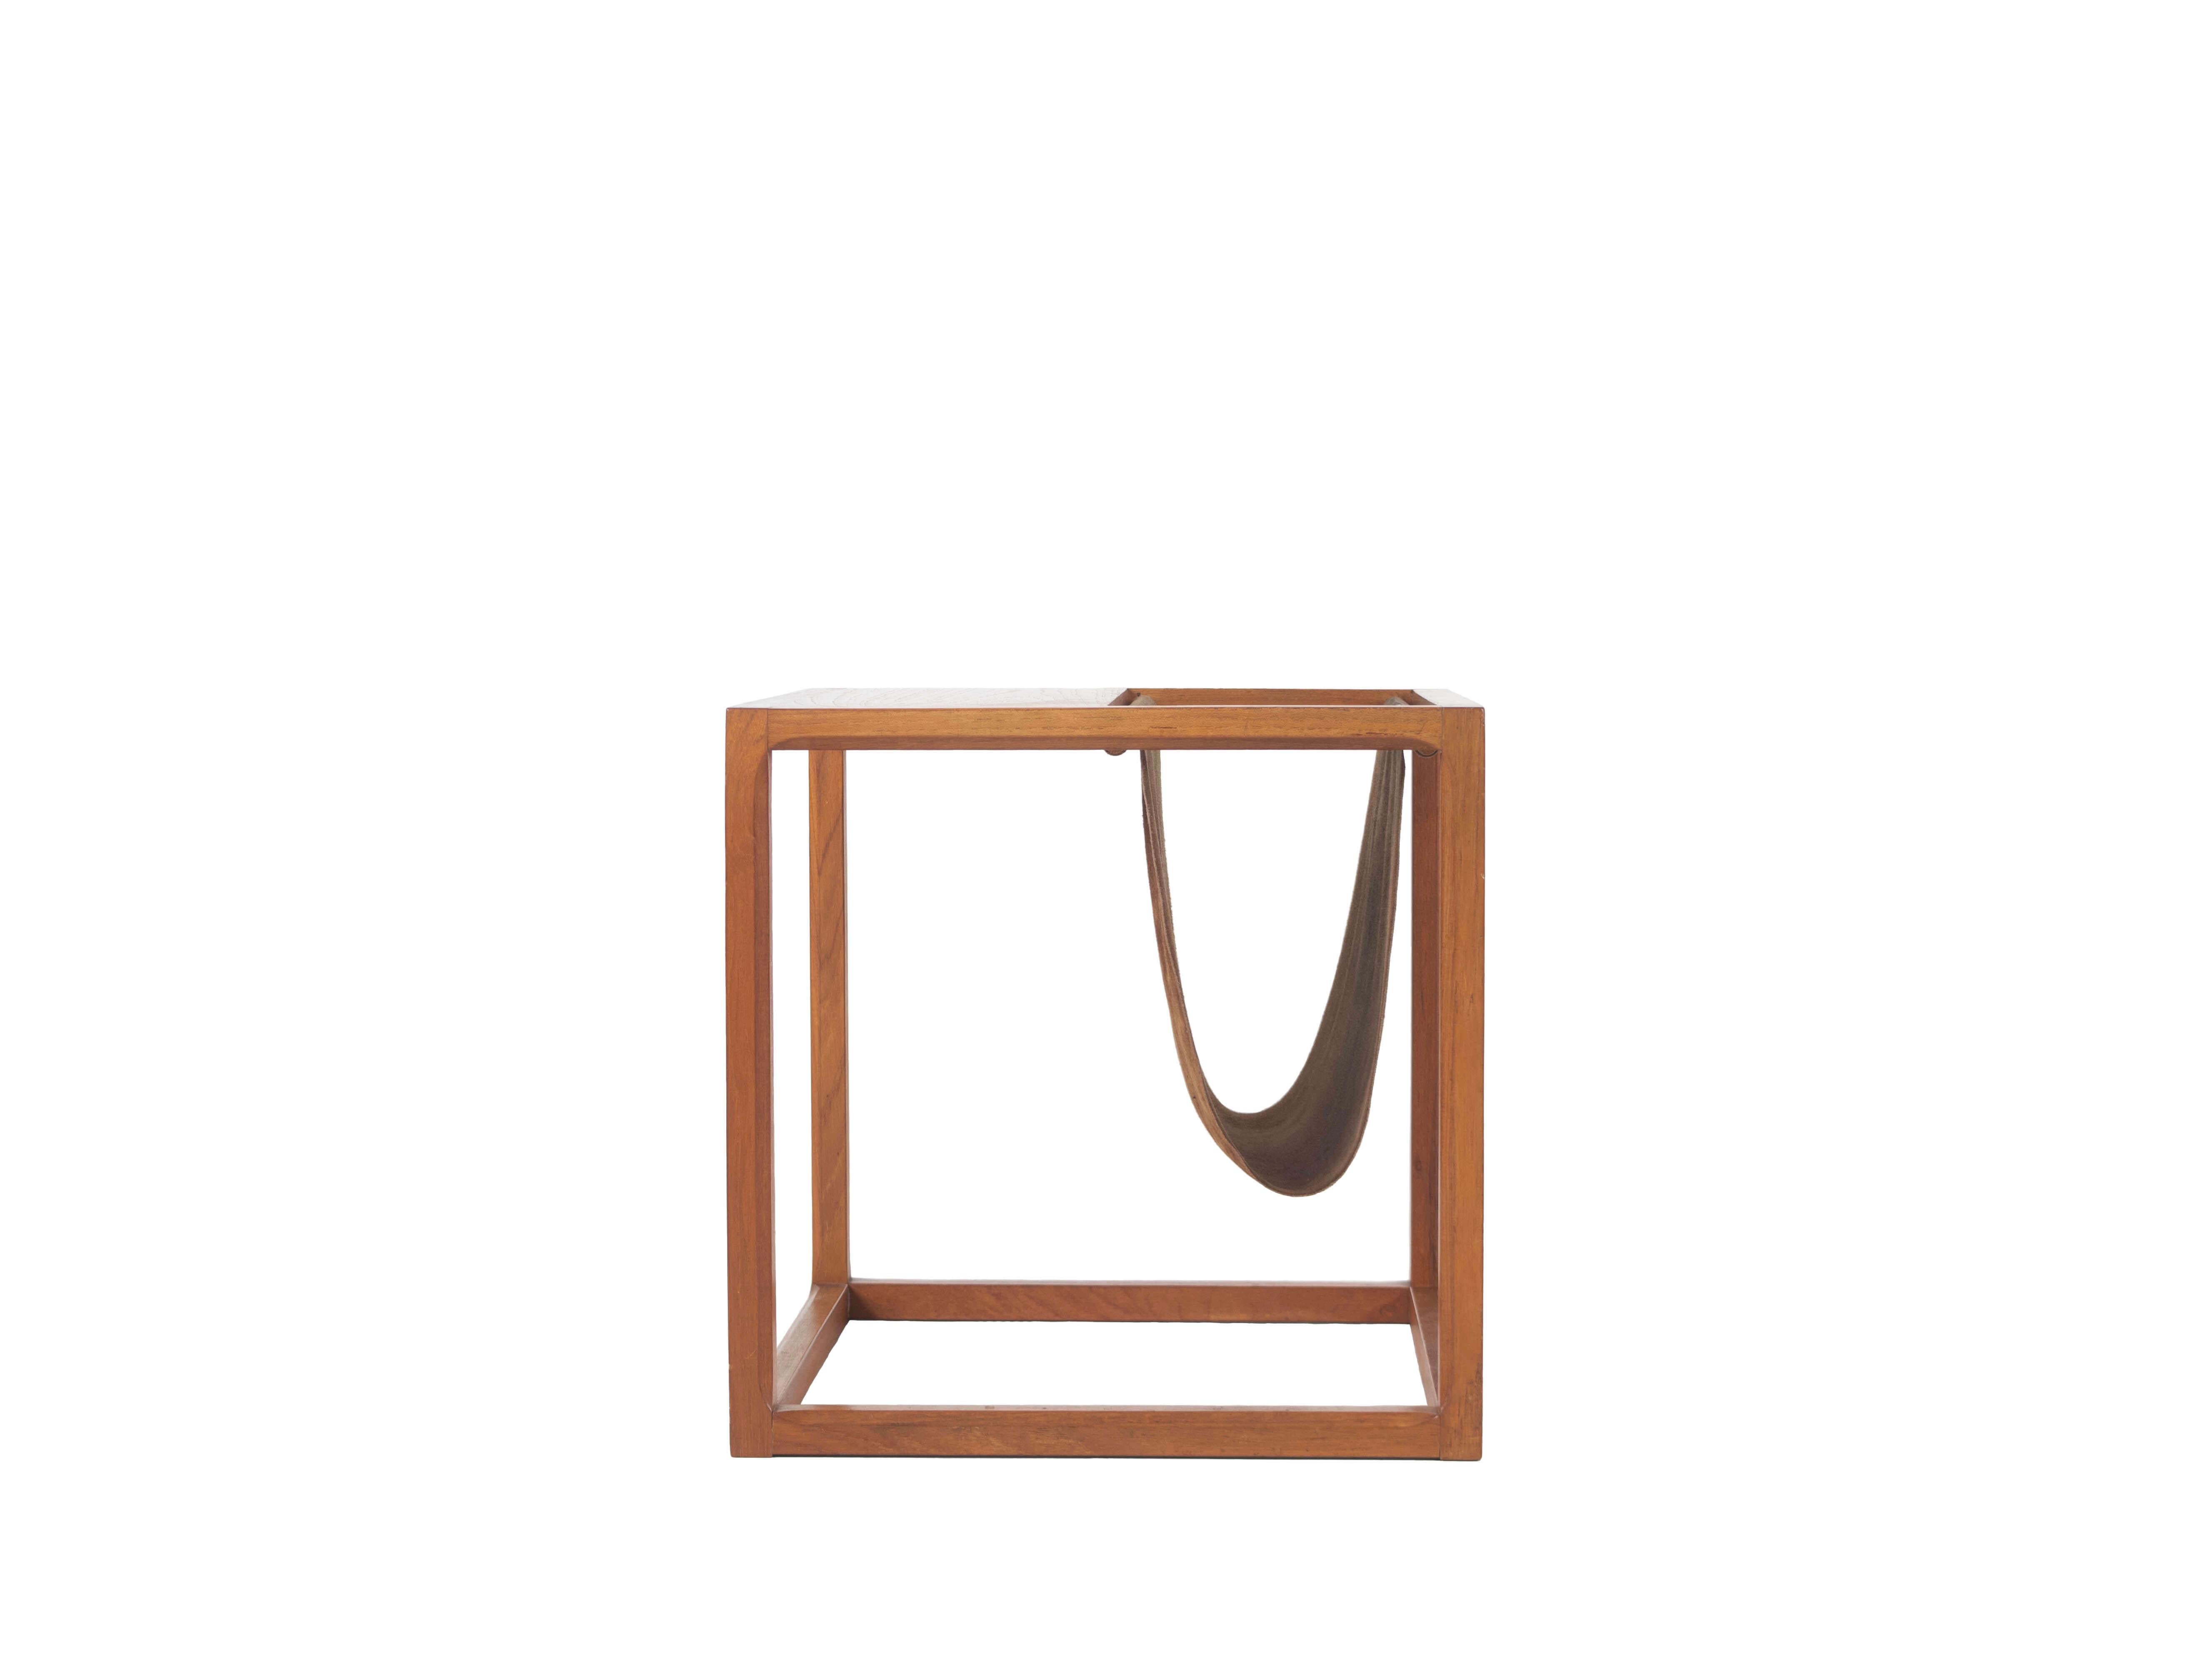 Danish Cube magazine rack / side table by Kai Kristiansen from the 1960s. This side table is made of teak wood and brown leather. The details of the table are very nice; each sidebar has rounded/curved edges. One of my personal favorites in terms of